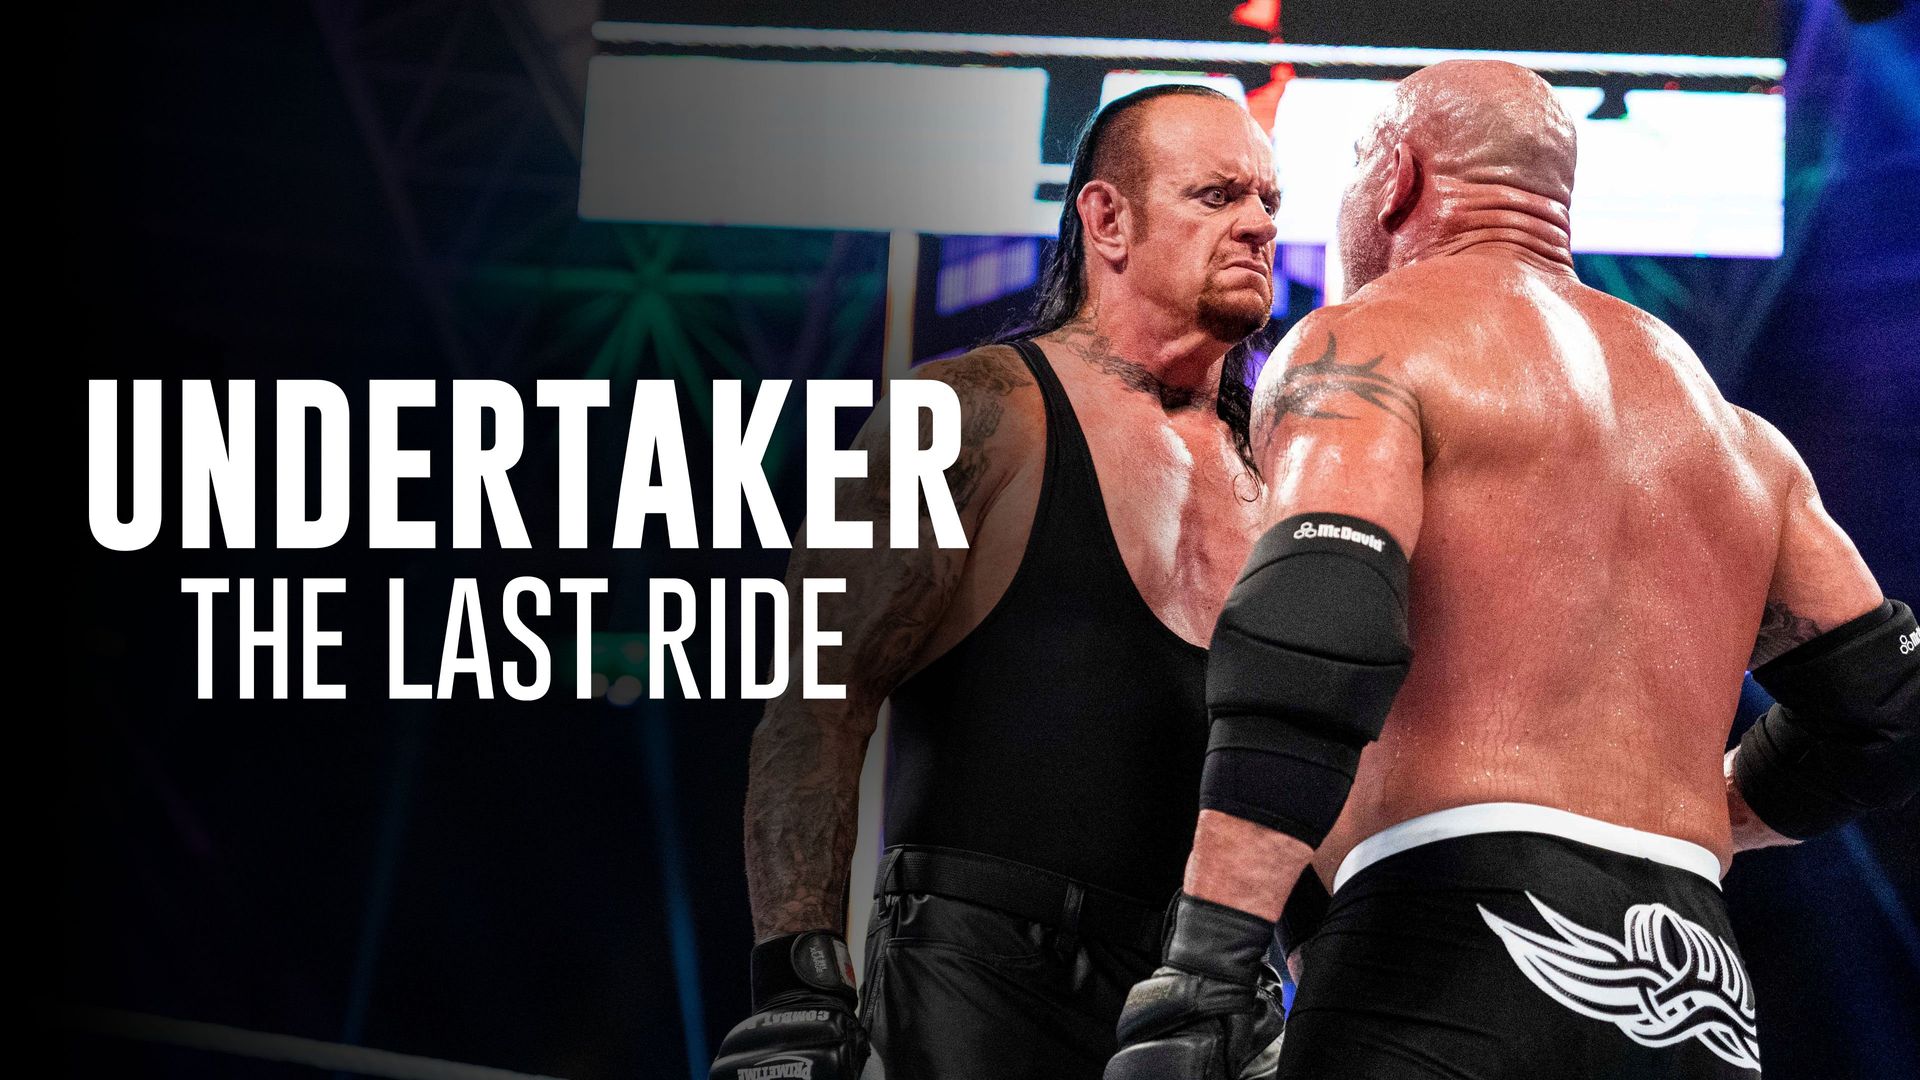 Undertaker: The Last Ride background